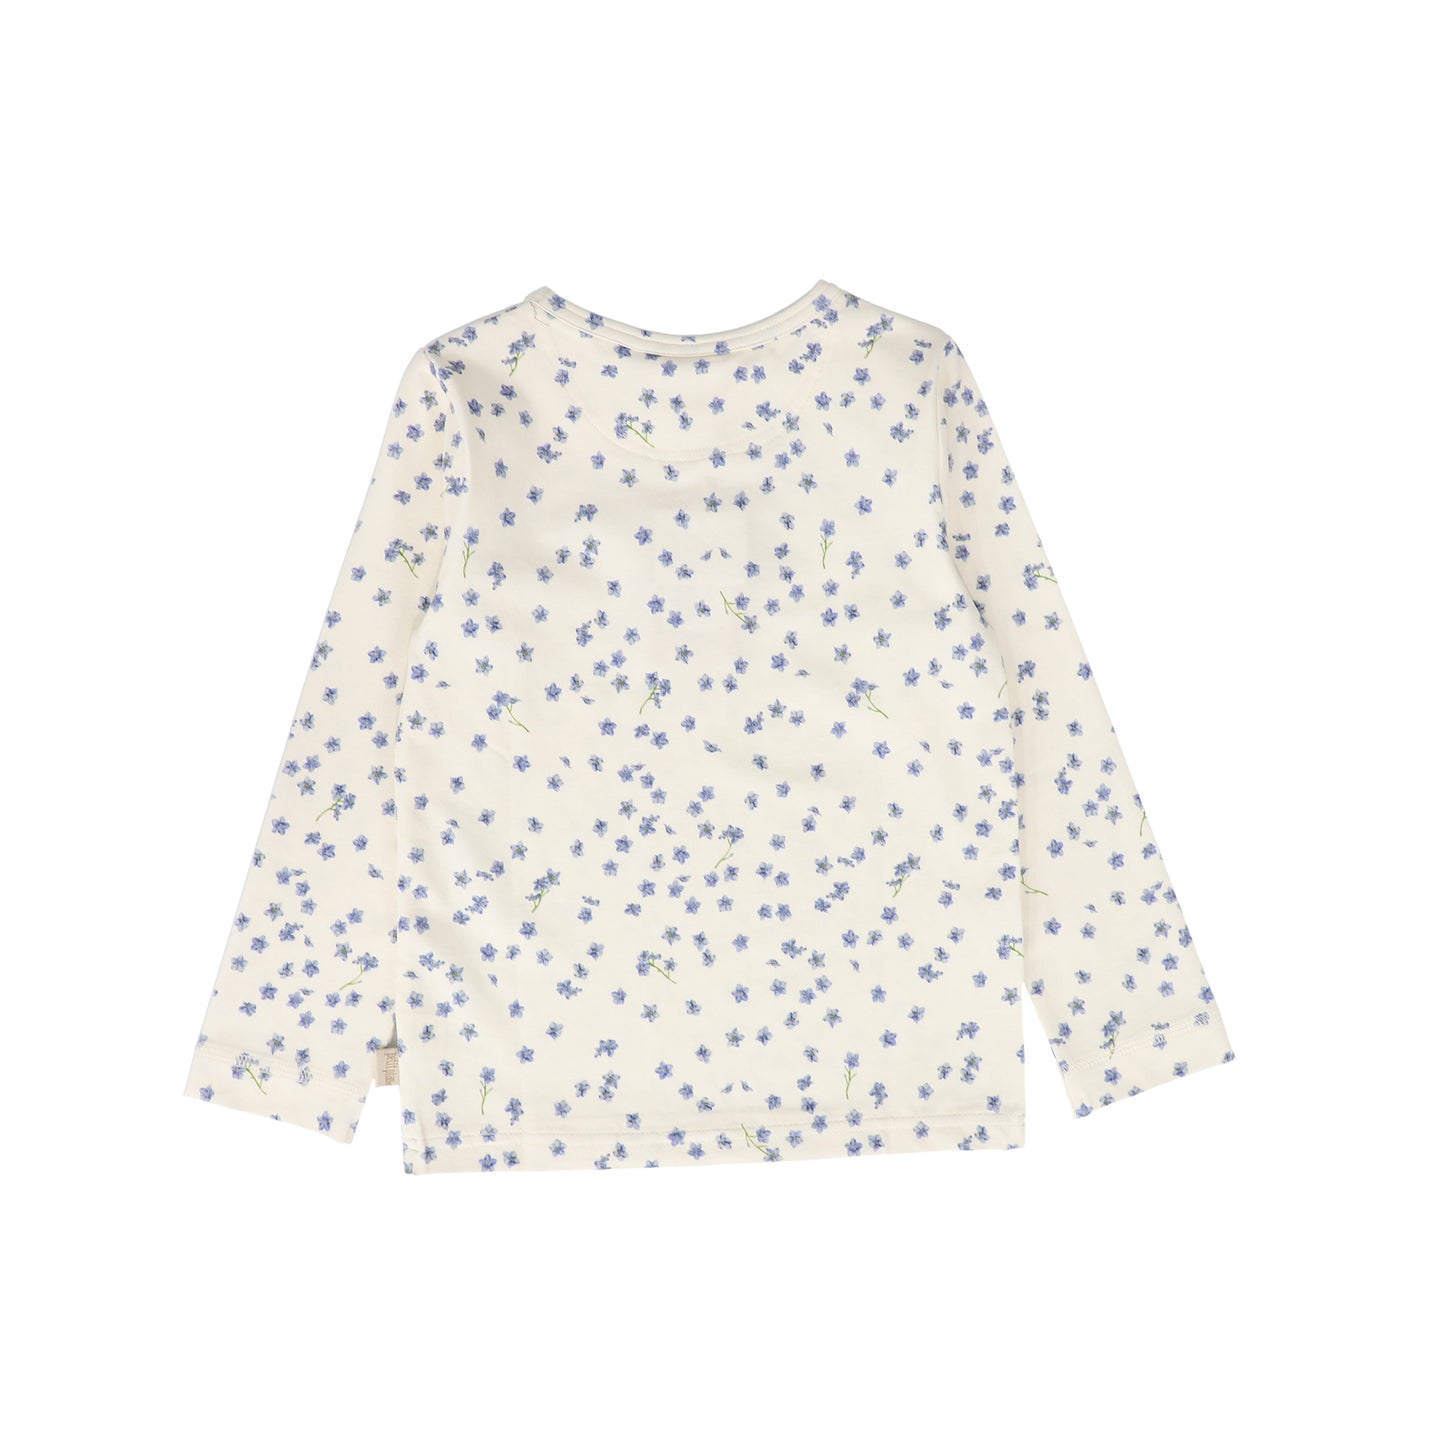 PETIT PIAO CREAM/BLUE FLORAL PRINTED TEE [FINAL SALE]